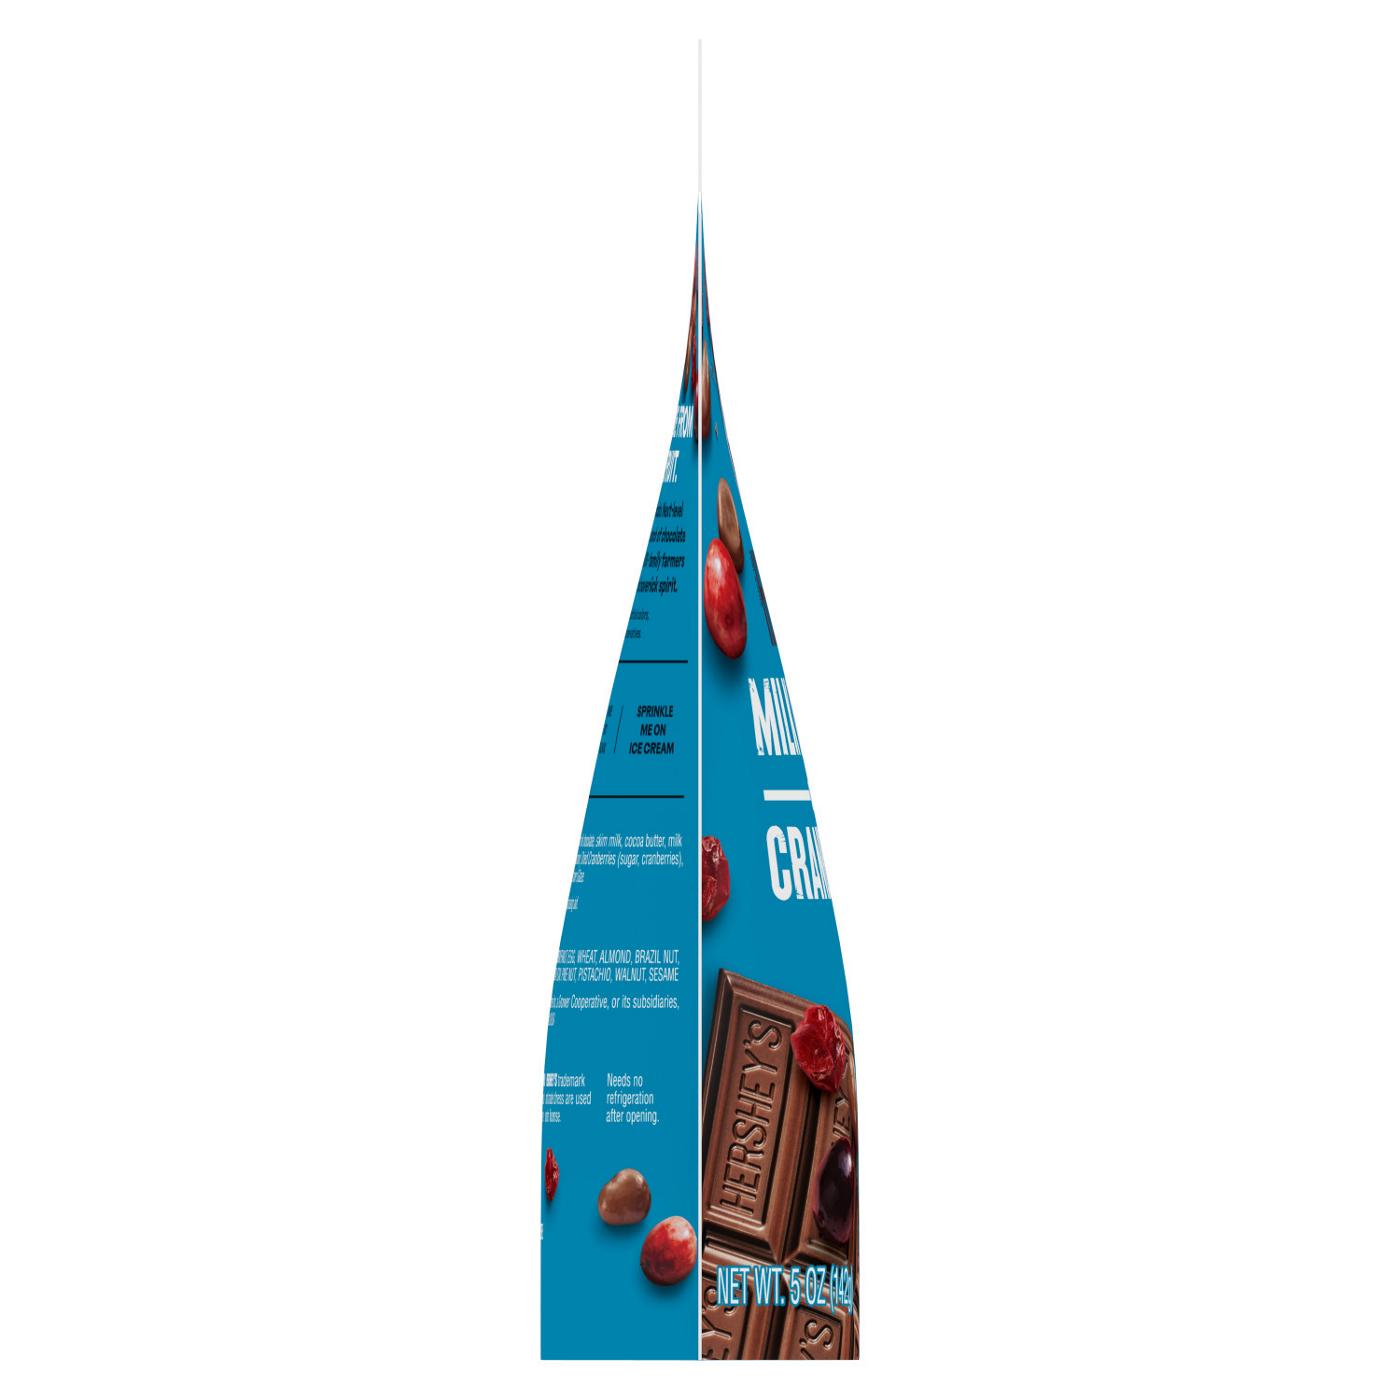 Ocean Spray Ocean Spray® HERSHEY’S® Milk Chocolate Dipped Cranberry Bites, Chocolate Covered Dried Cranberries, 5 Oz Pouch; image 2 of 7